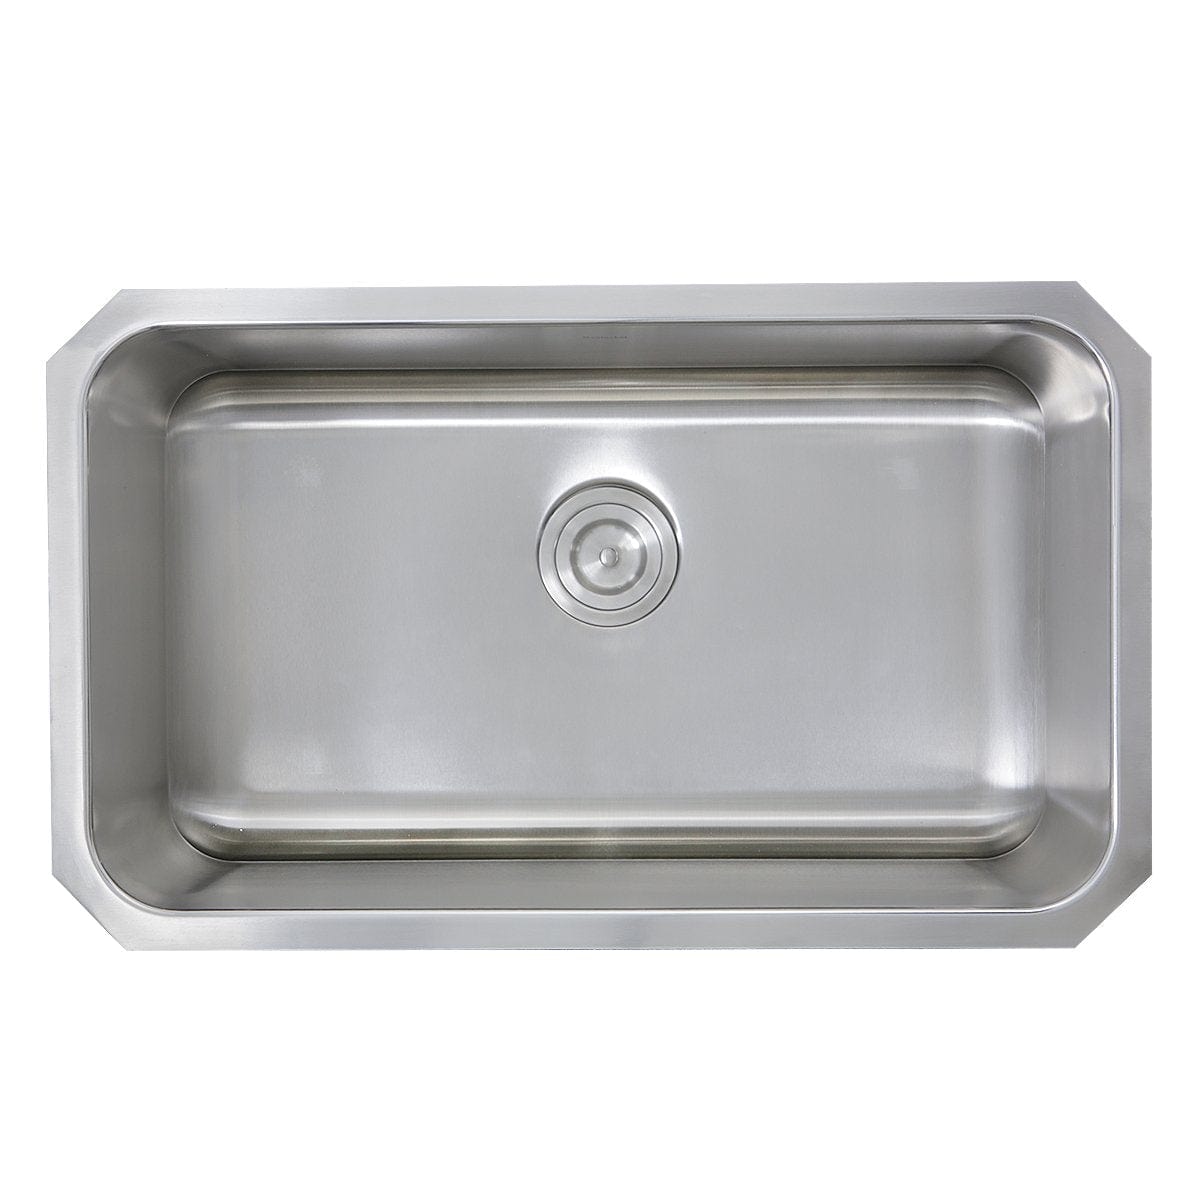 Nantucket 30" Large Rectangle Single Bowl Undermount Stainless Steel Kitchen Sink, 11 Inches Deep - NS43-11-16